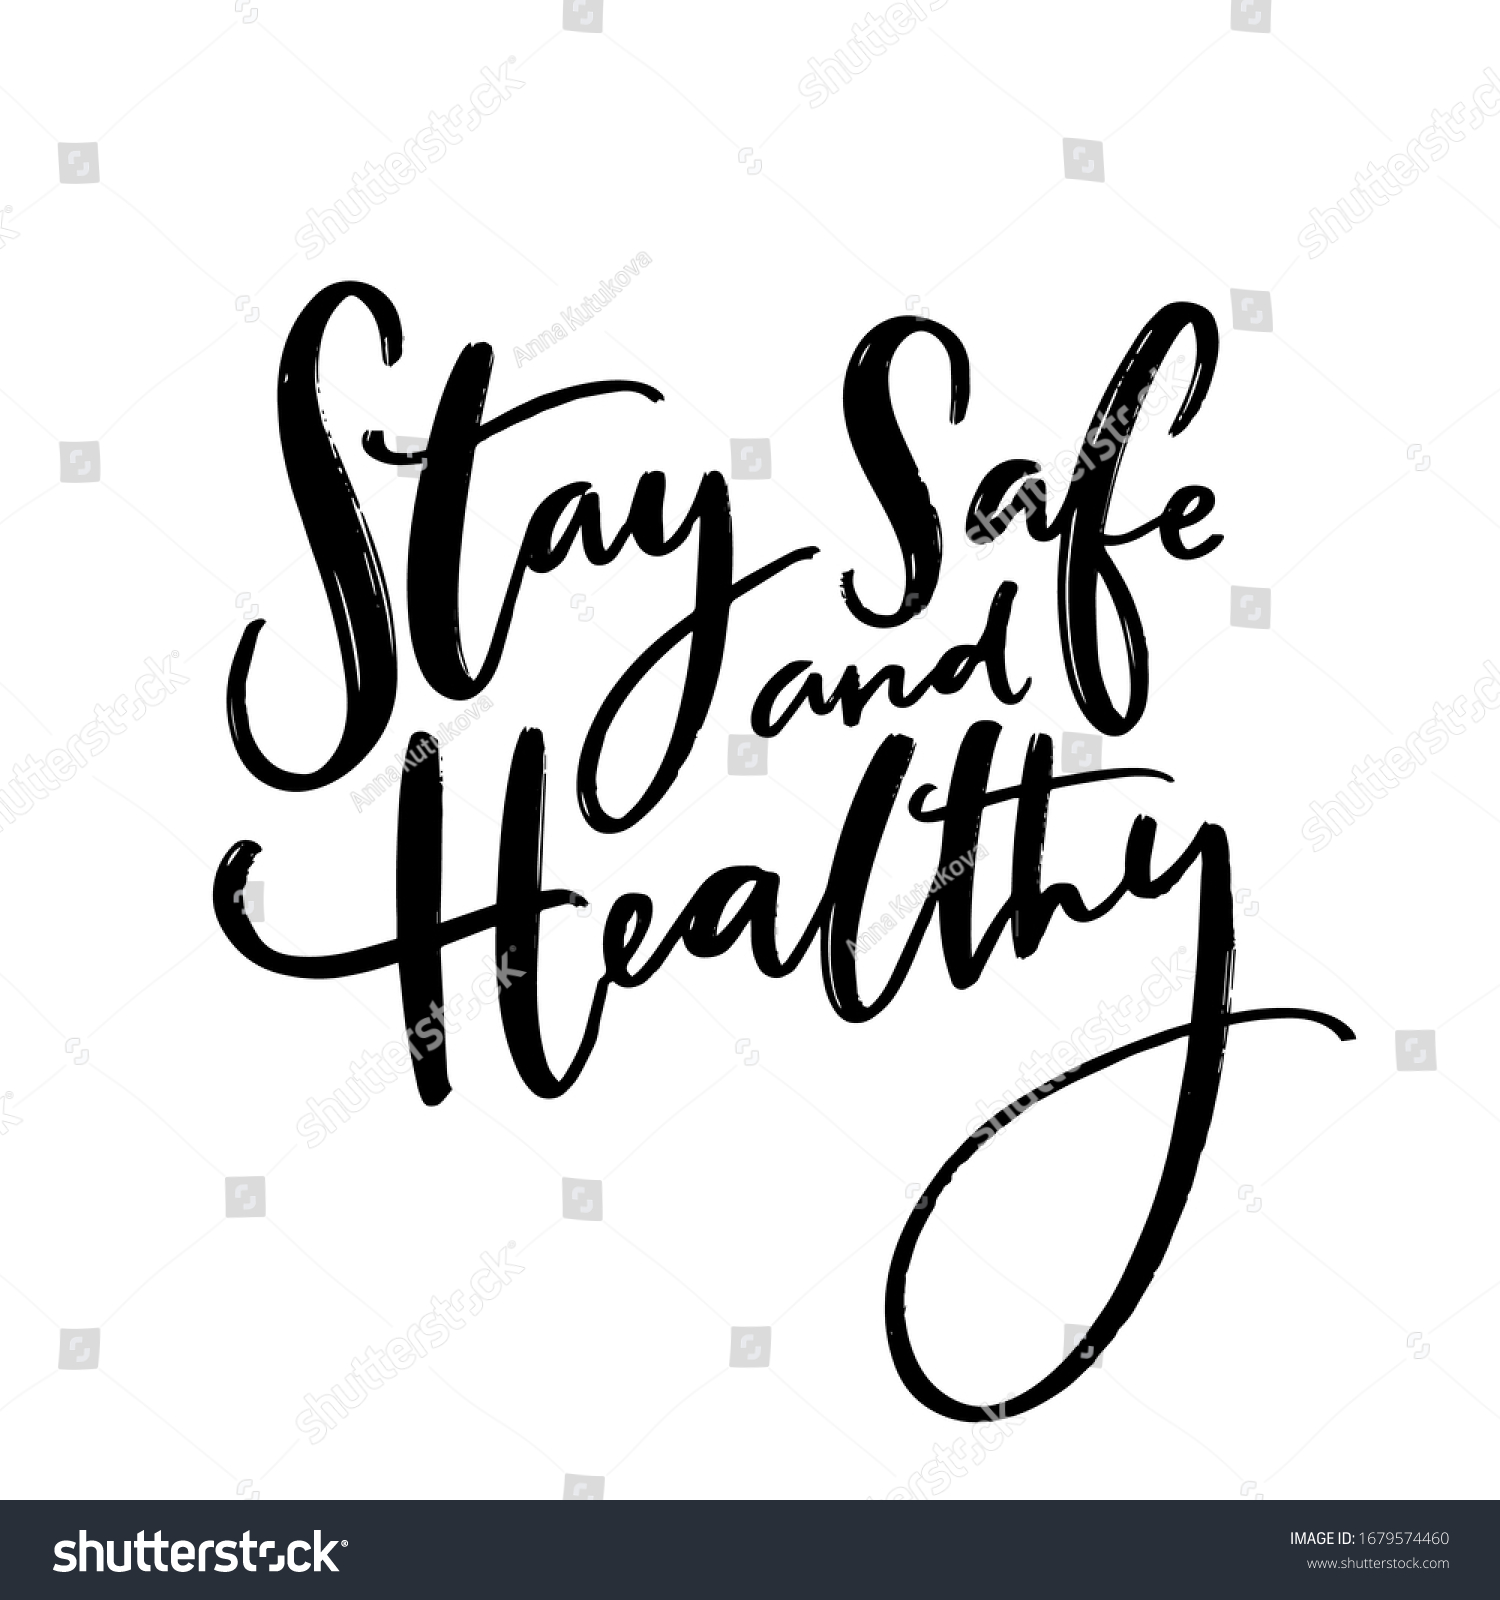 Staying-healthy Images, Stock Photos & Vectors | Shutterstock